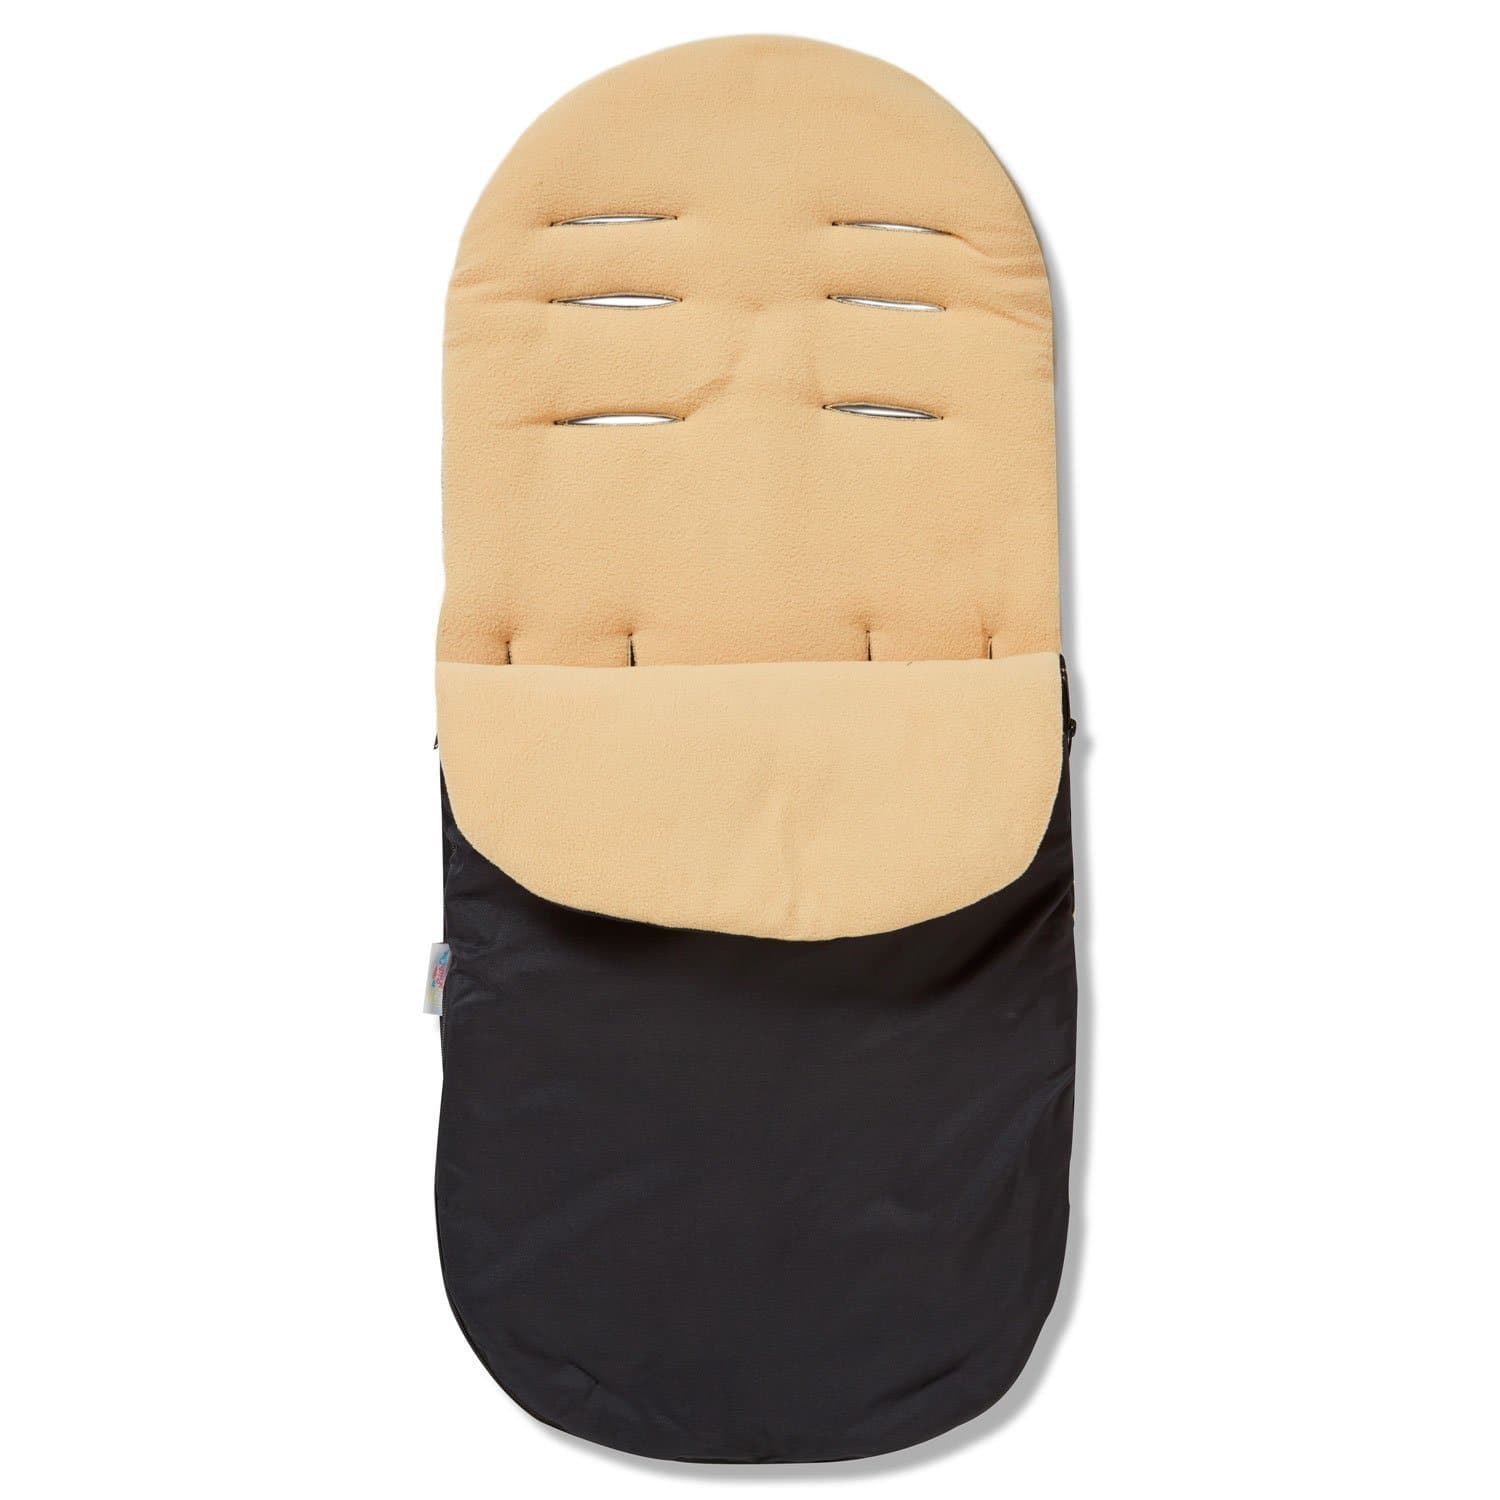 Footmuff / Cosy Toes Compatible with My Babiie - For Your Little One